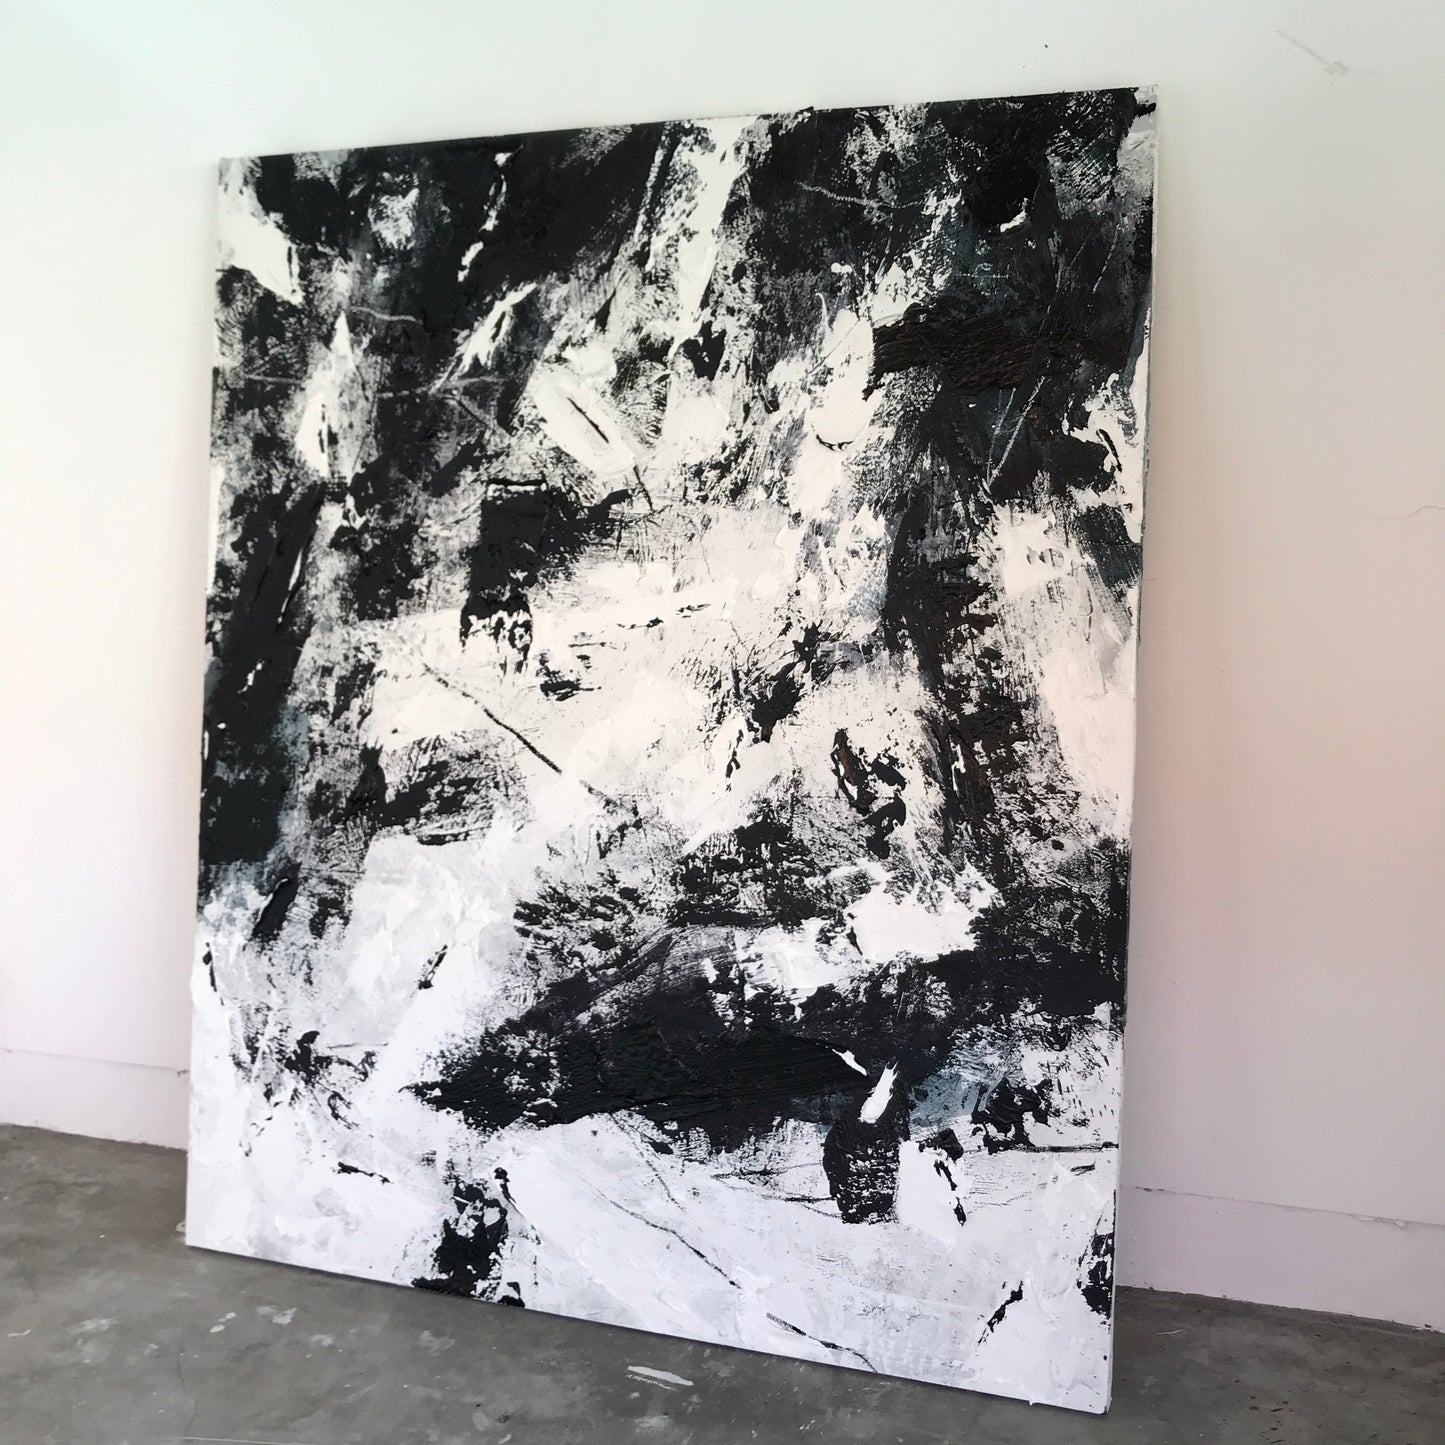 Consumed thoughts 180x150cm